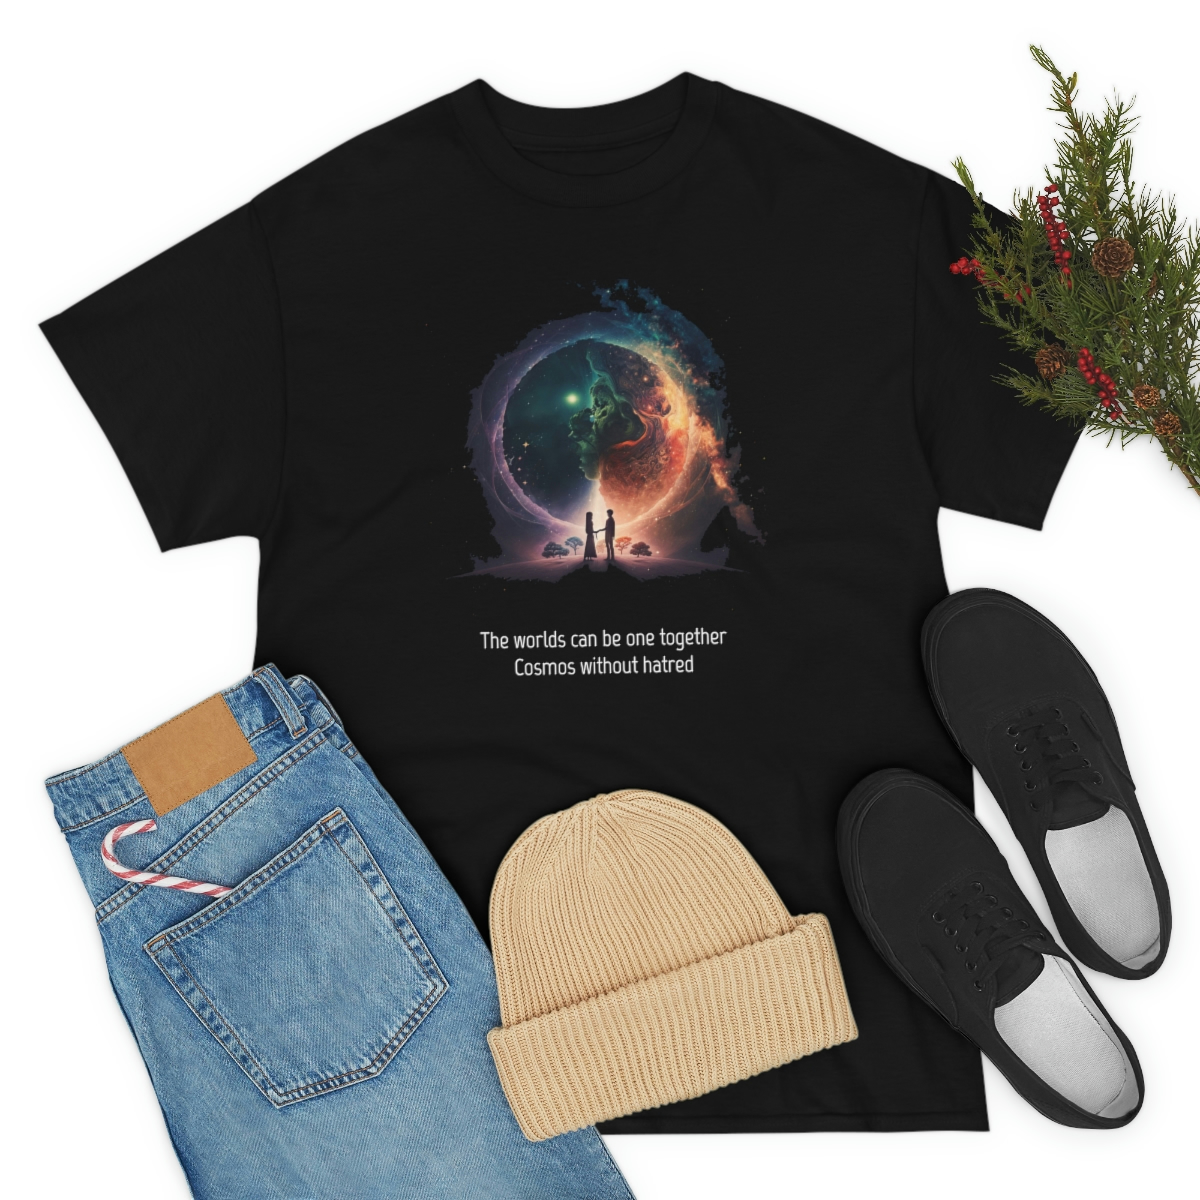 the-worlds-can-be-one-together-cosmos-without-hatred-short-sleeve-graphic-black-t-shirt